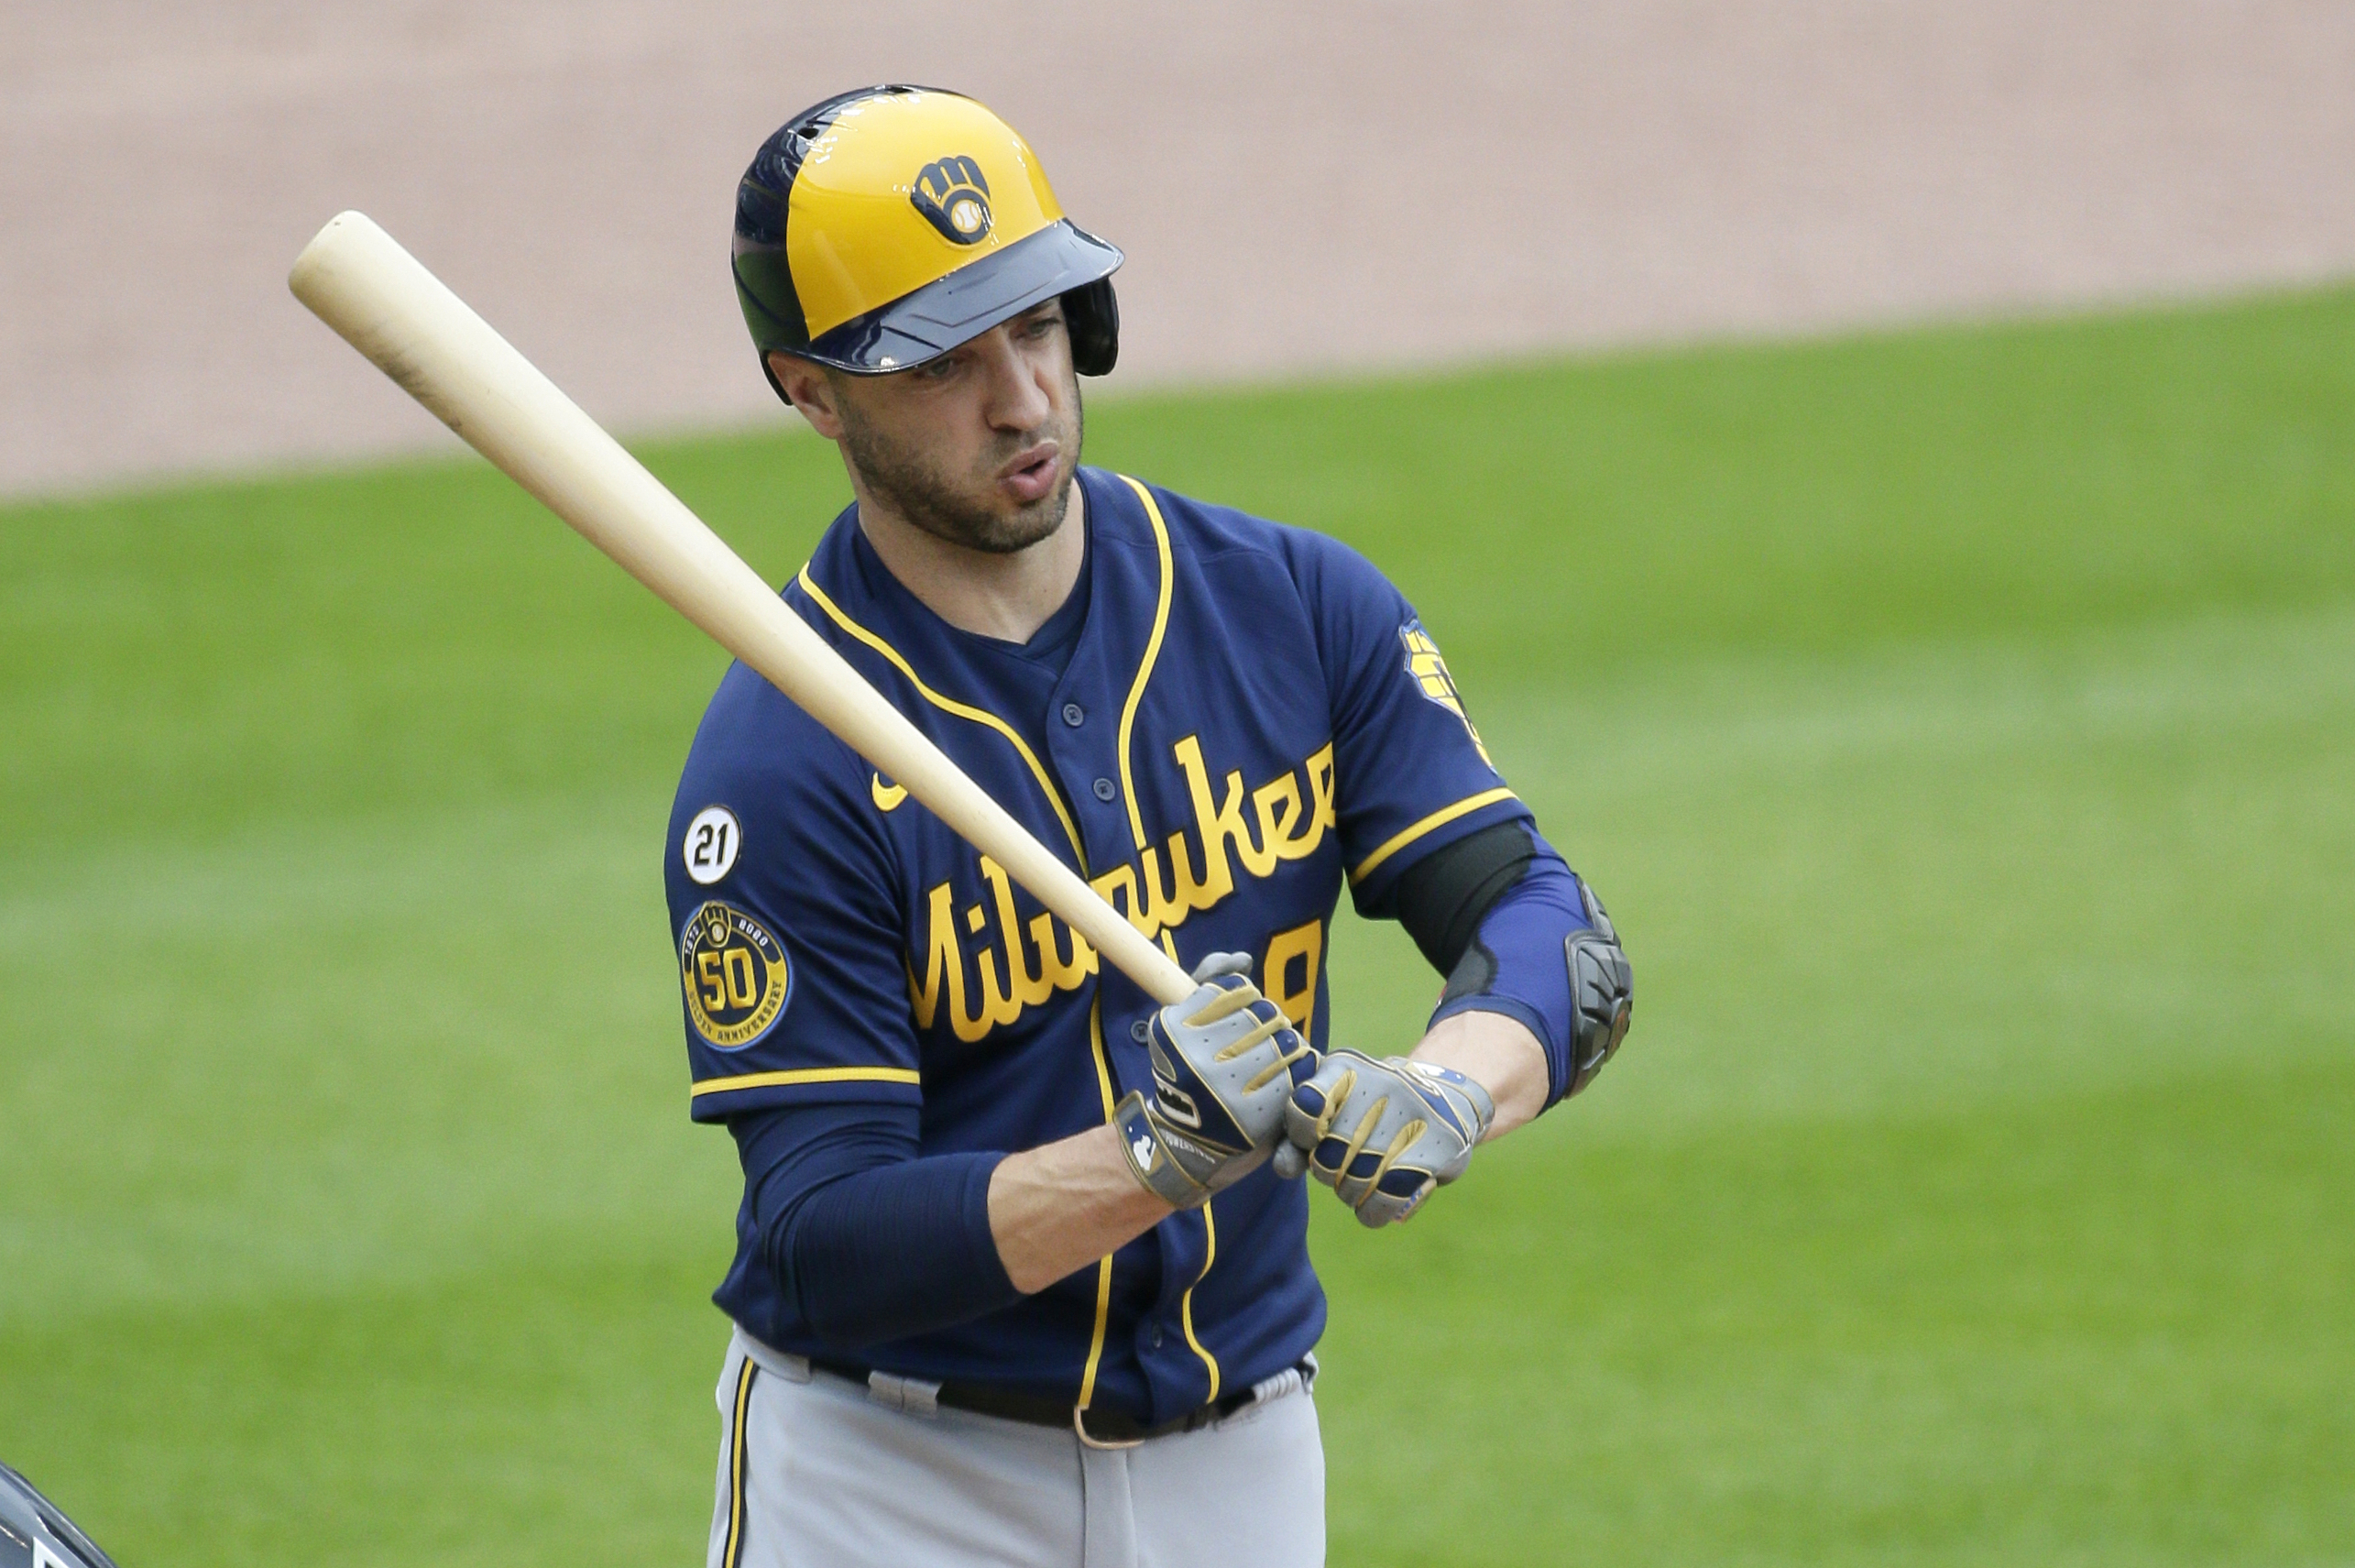 Slugger Ryan Braun retires after 14 year career with Brewers